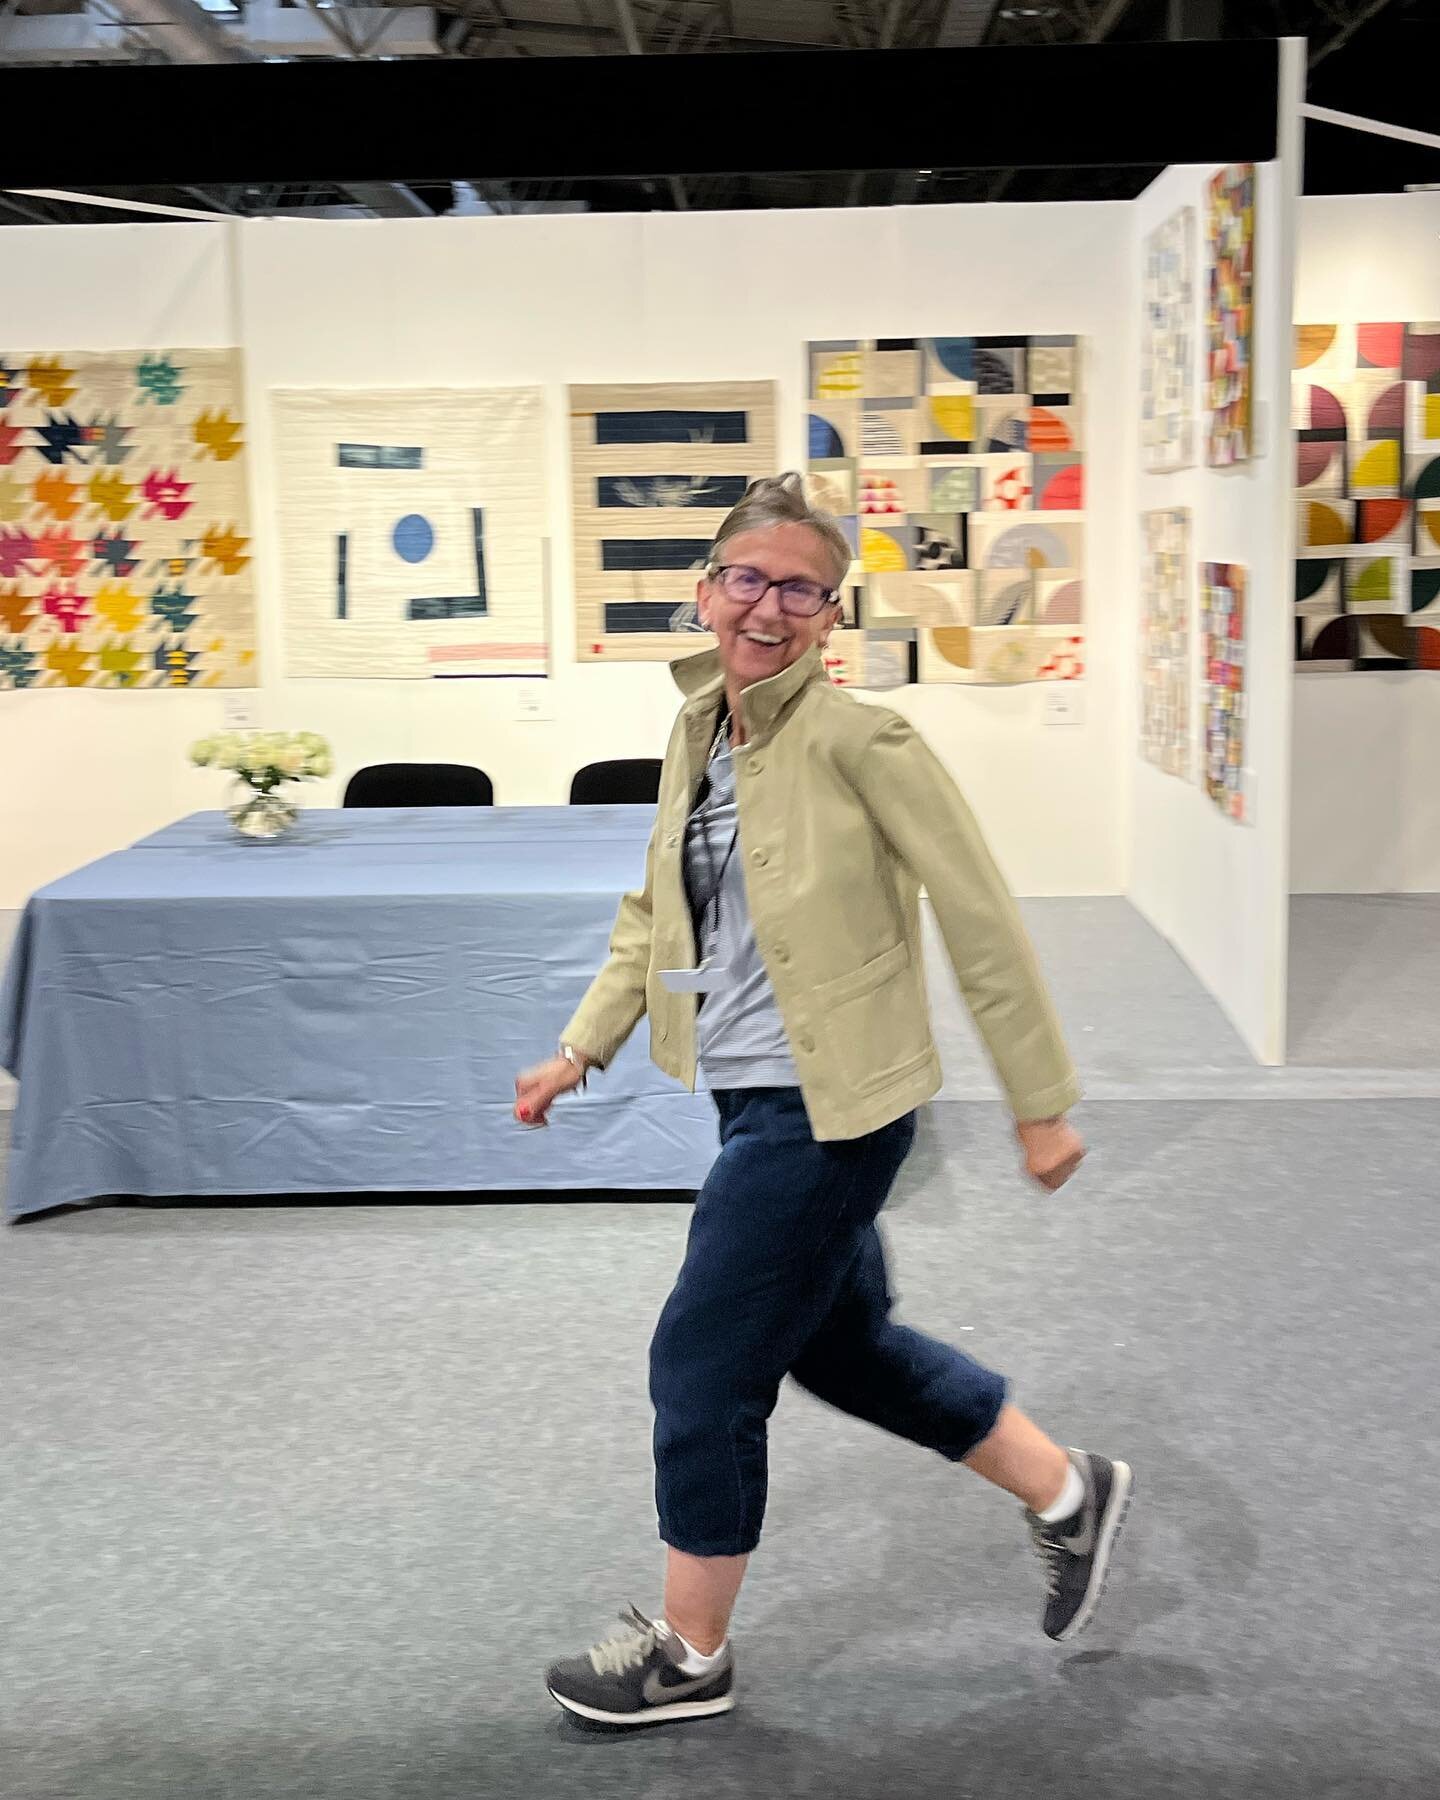 A little bit of silliness at the end of a long day setting up the gallery. What a day!

I have so many people to thank for making this possible. 

Firstly the Festival team, especially Jacob and Raj for hanging my work so well without any complaints 